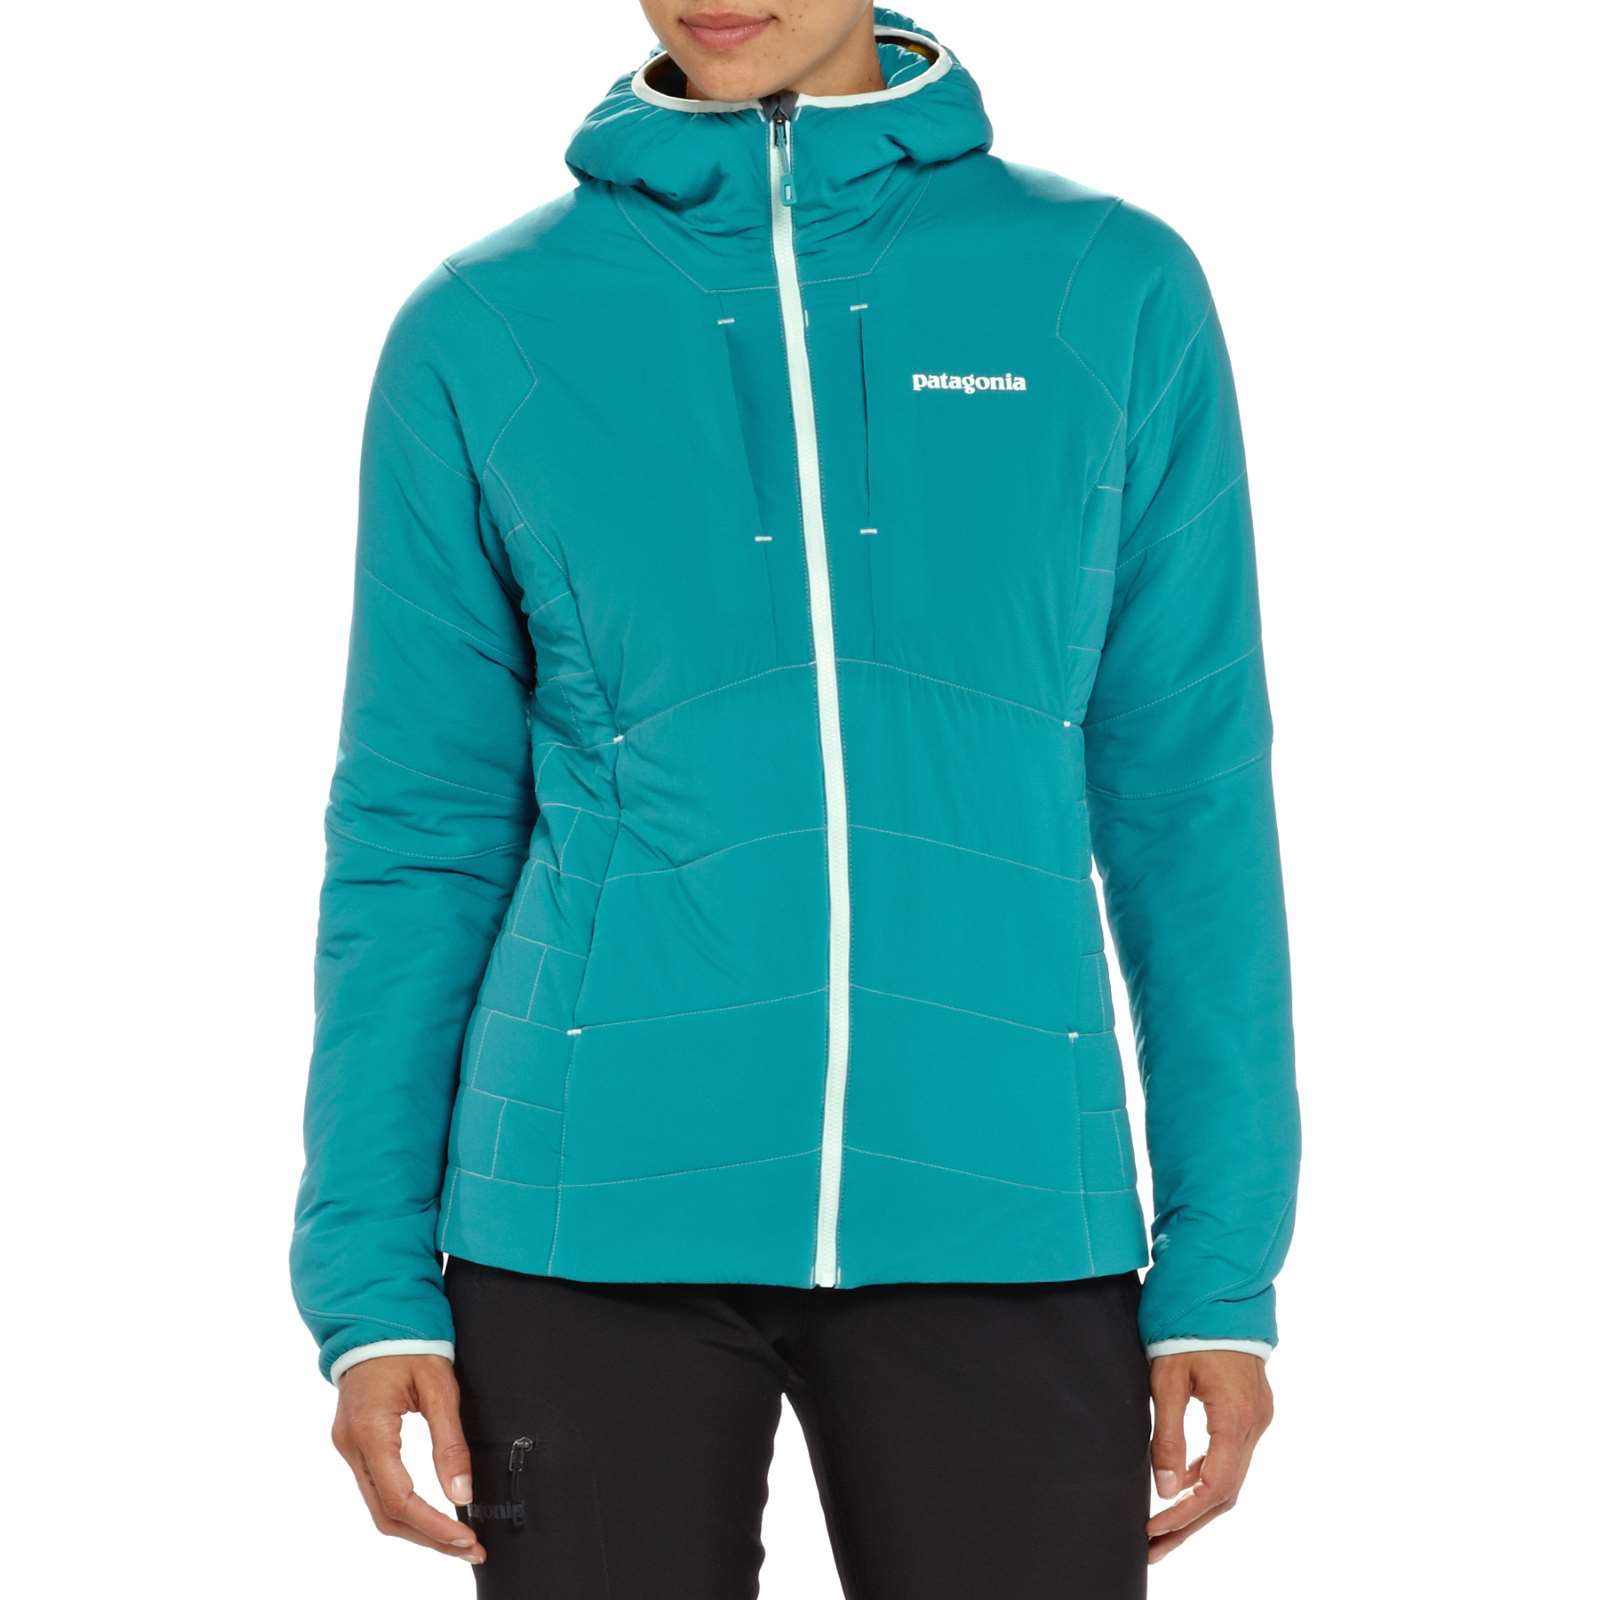 Sikker Alvorlig Udsæt Buy Patagonia Women's Nano-Air Hoody from Outnorth